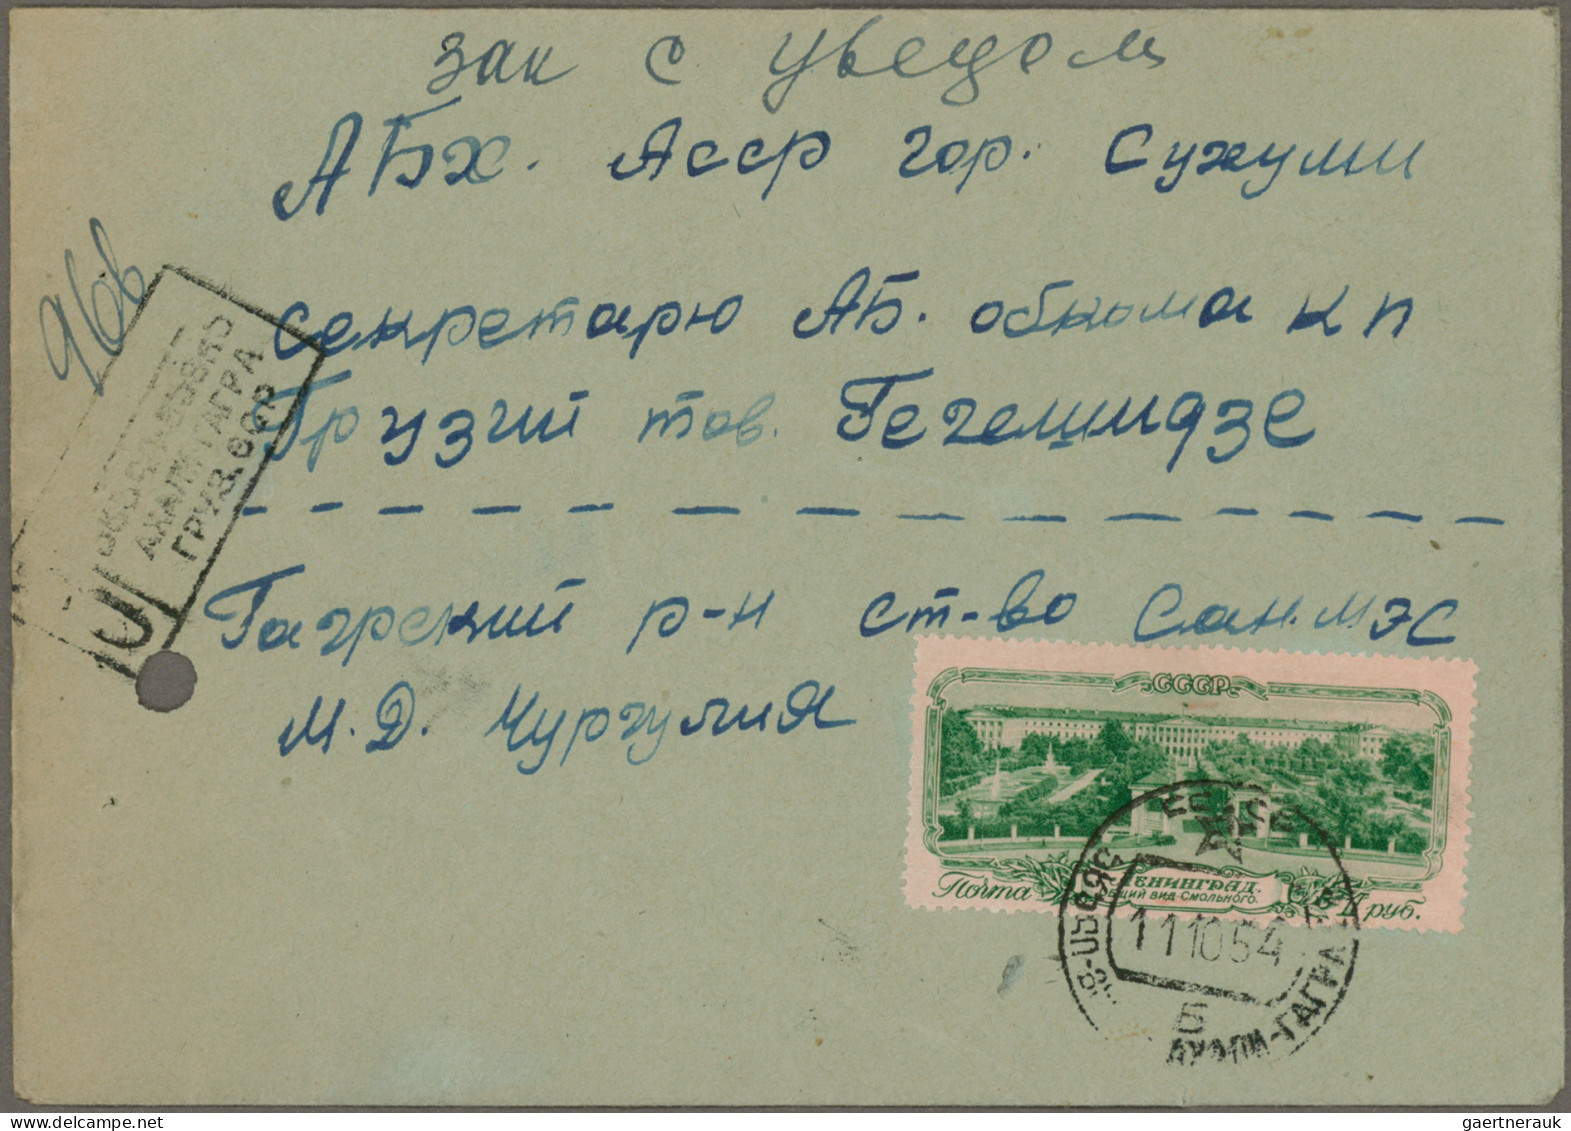 Georgia: 1930's/1980's ca.: About 200 covers and postal stationery envelopes fro